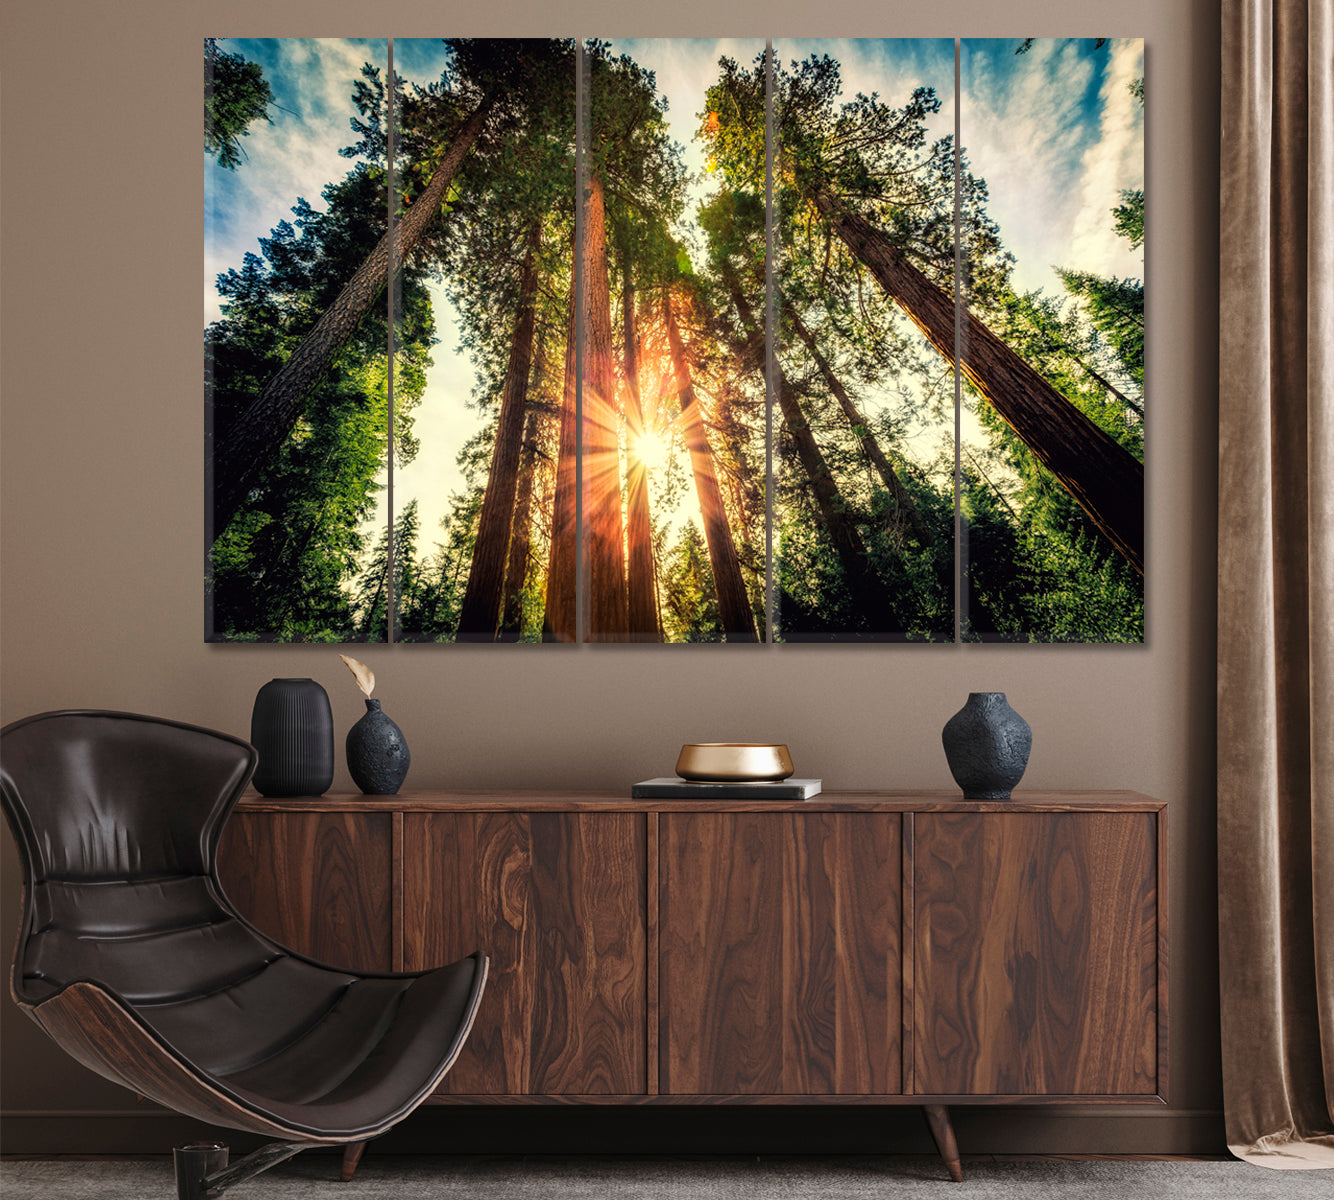 Giant Sequoias Yosemite National Park Canvas Print ArtLexy 5 Panels 36"x24" inches 